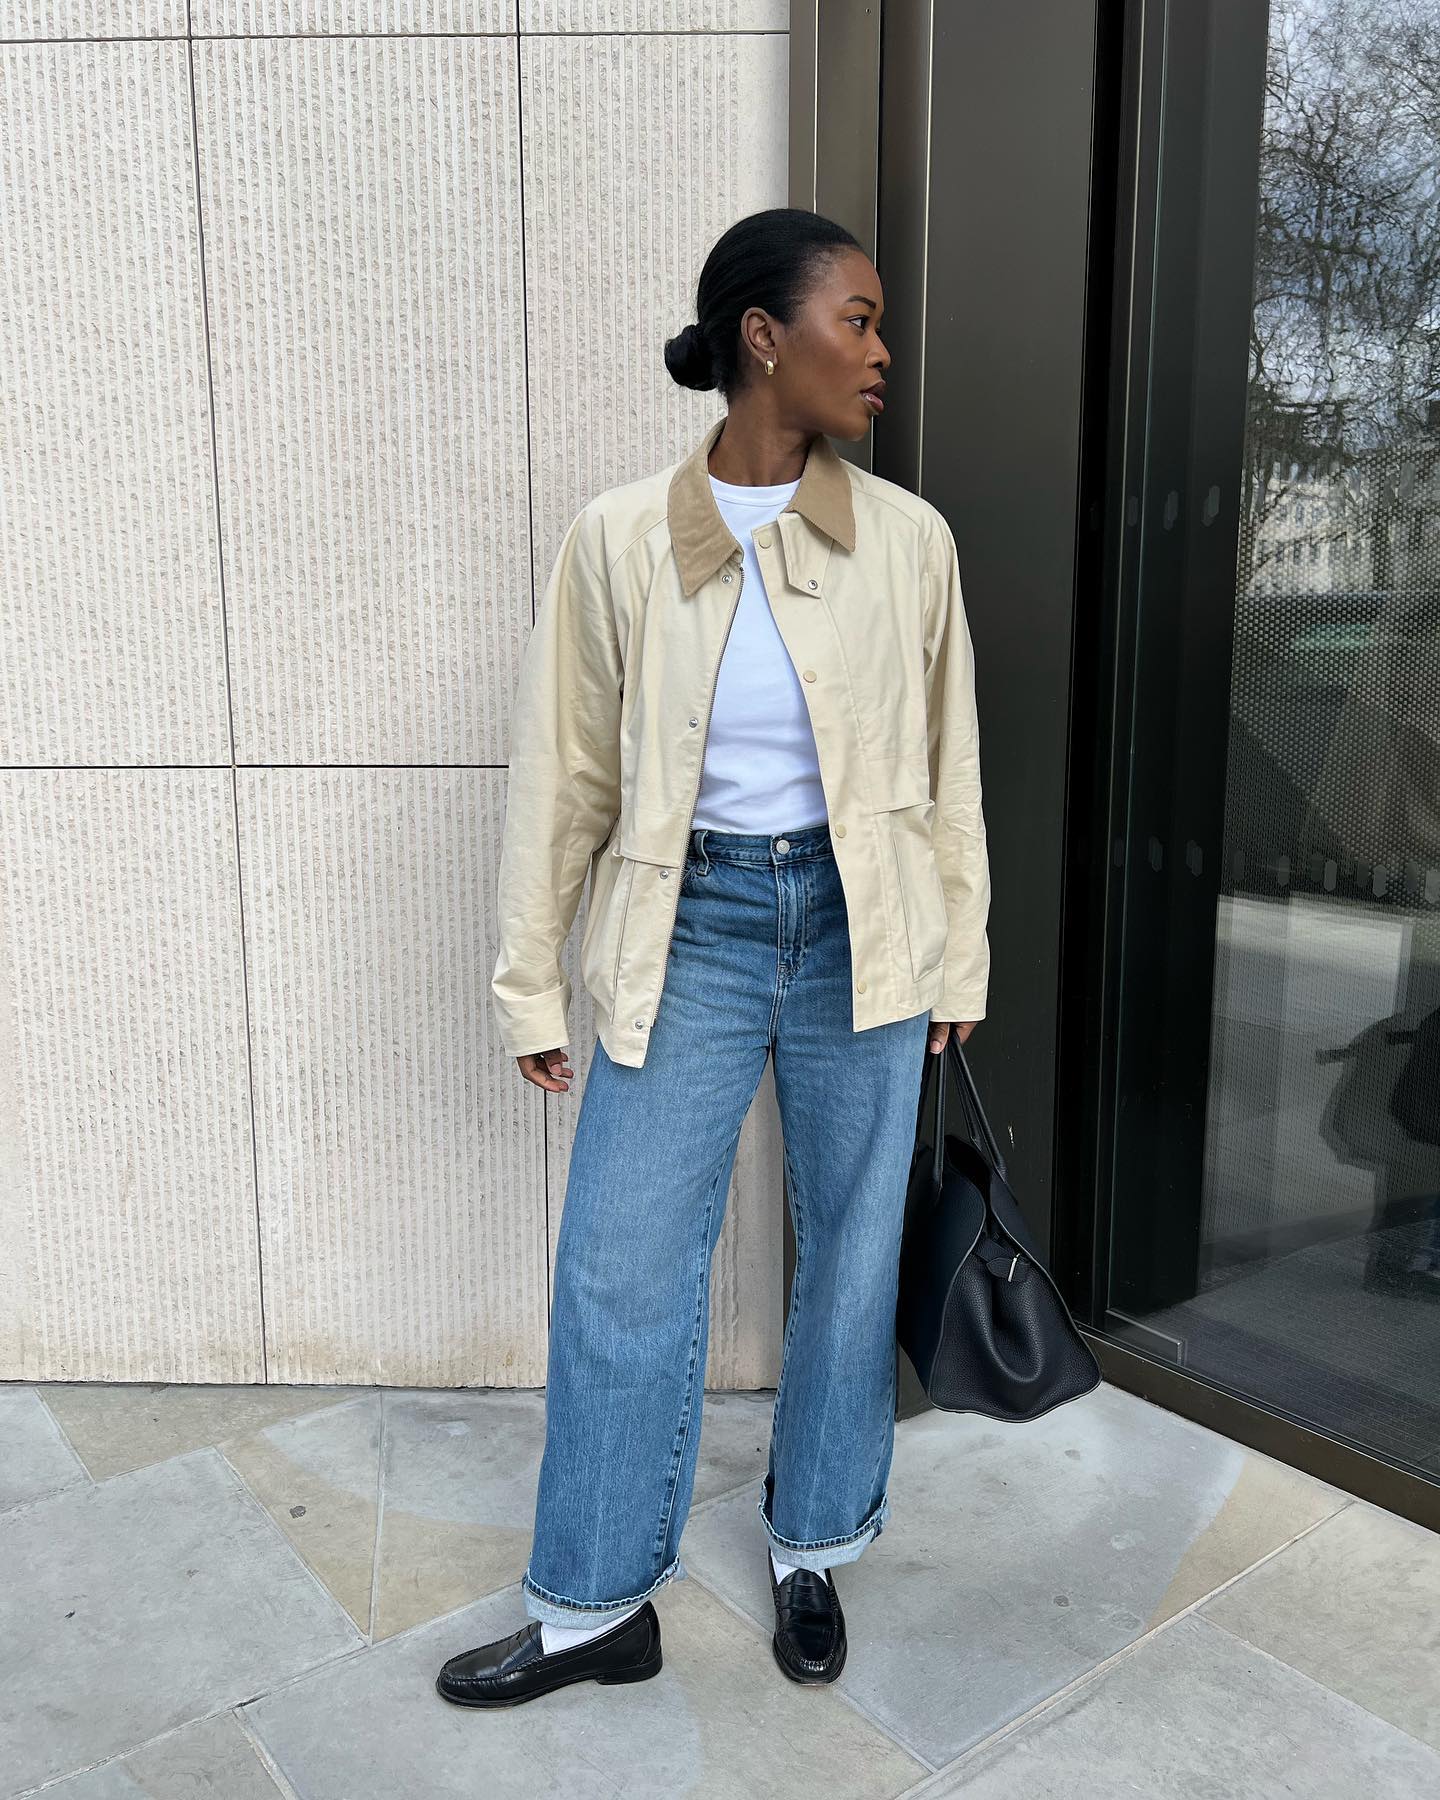 female fashion influencer poses in London wearing a low bun, neutral barn coat, white t-shirt, cuffed jeans, white socks, and black loafers